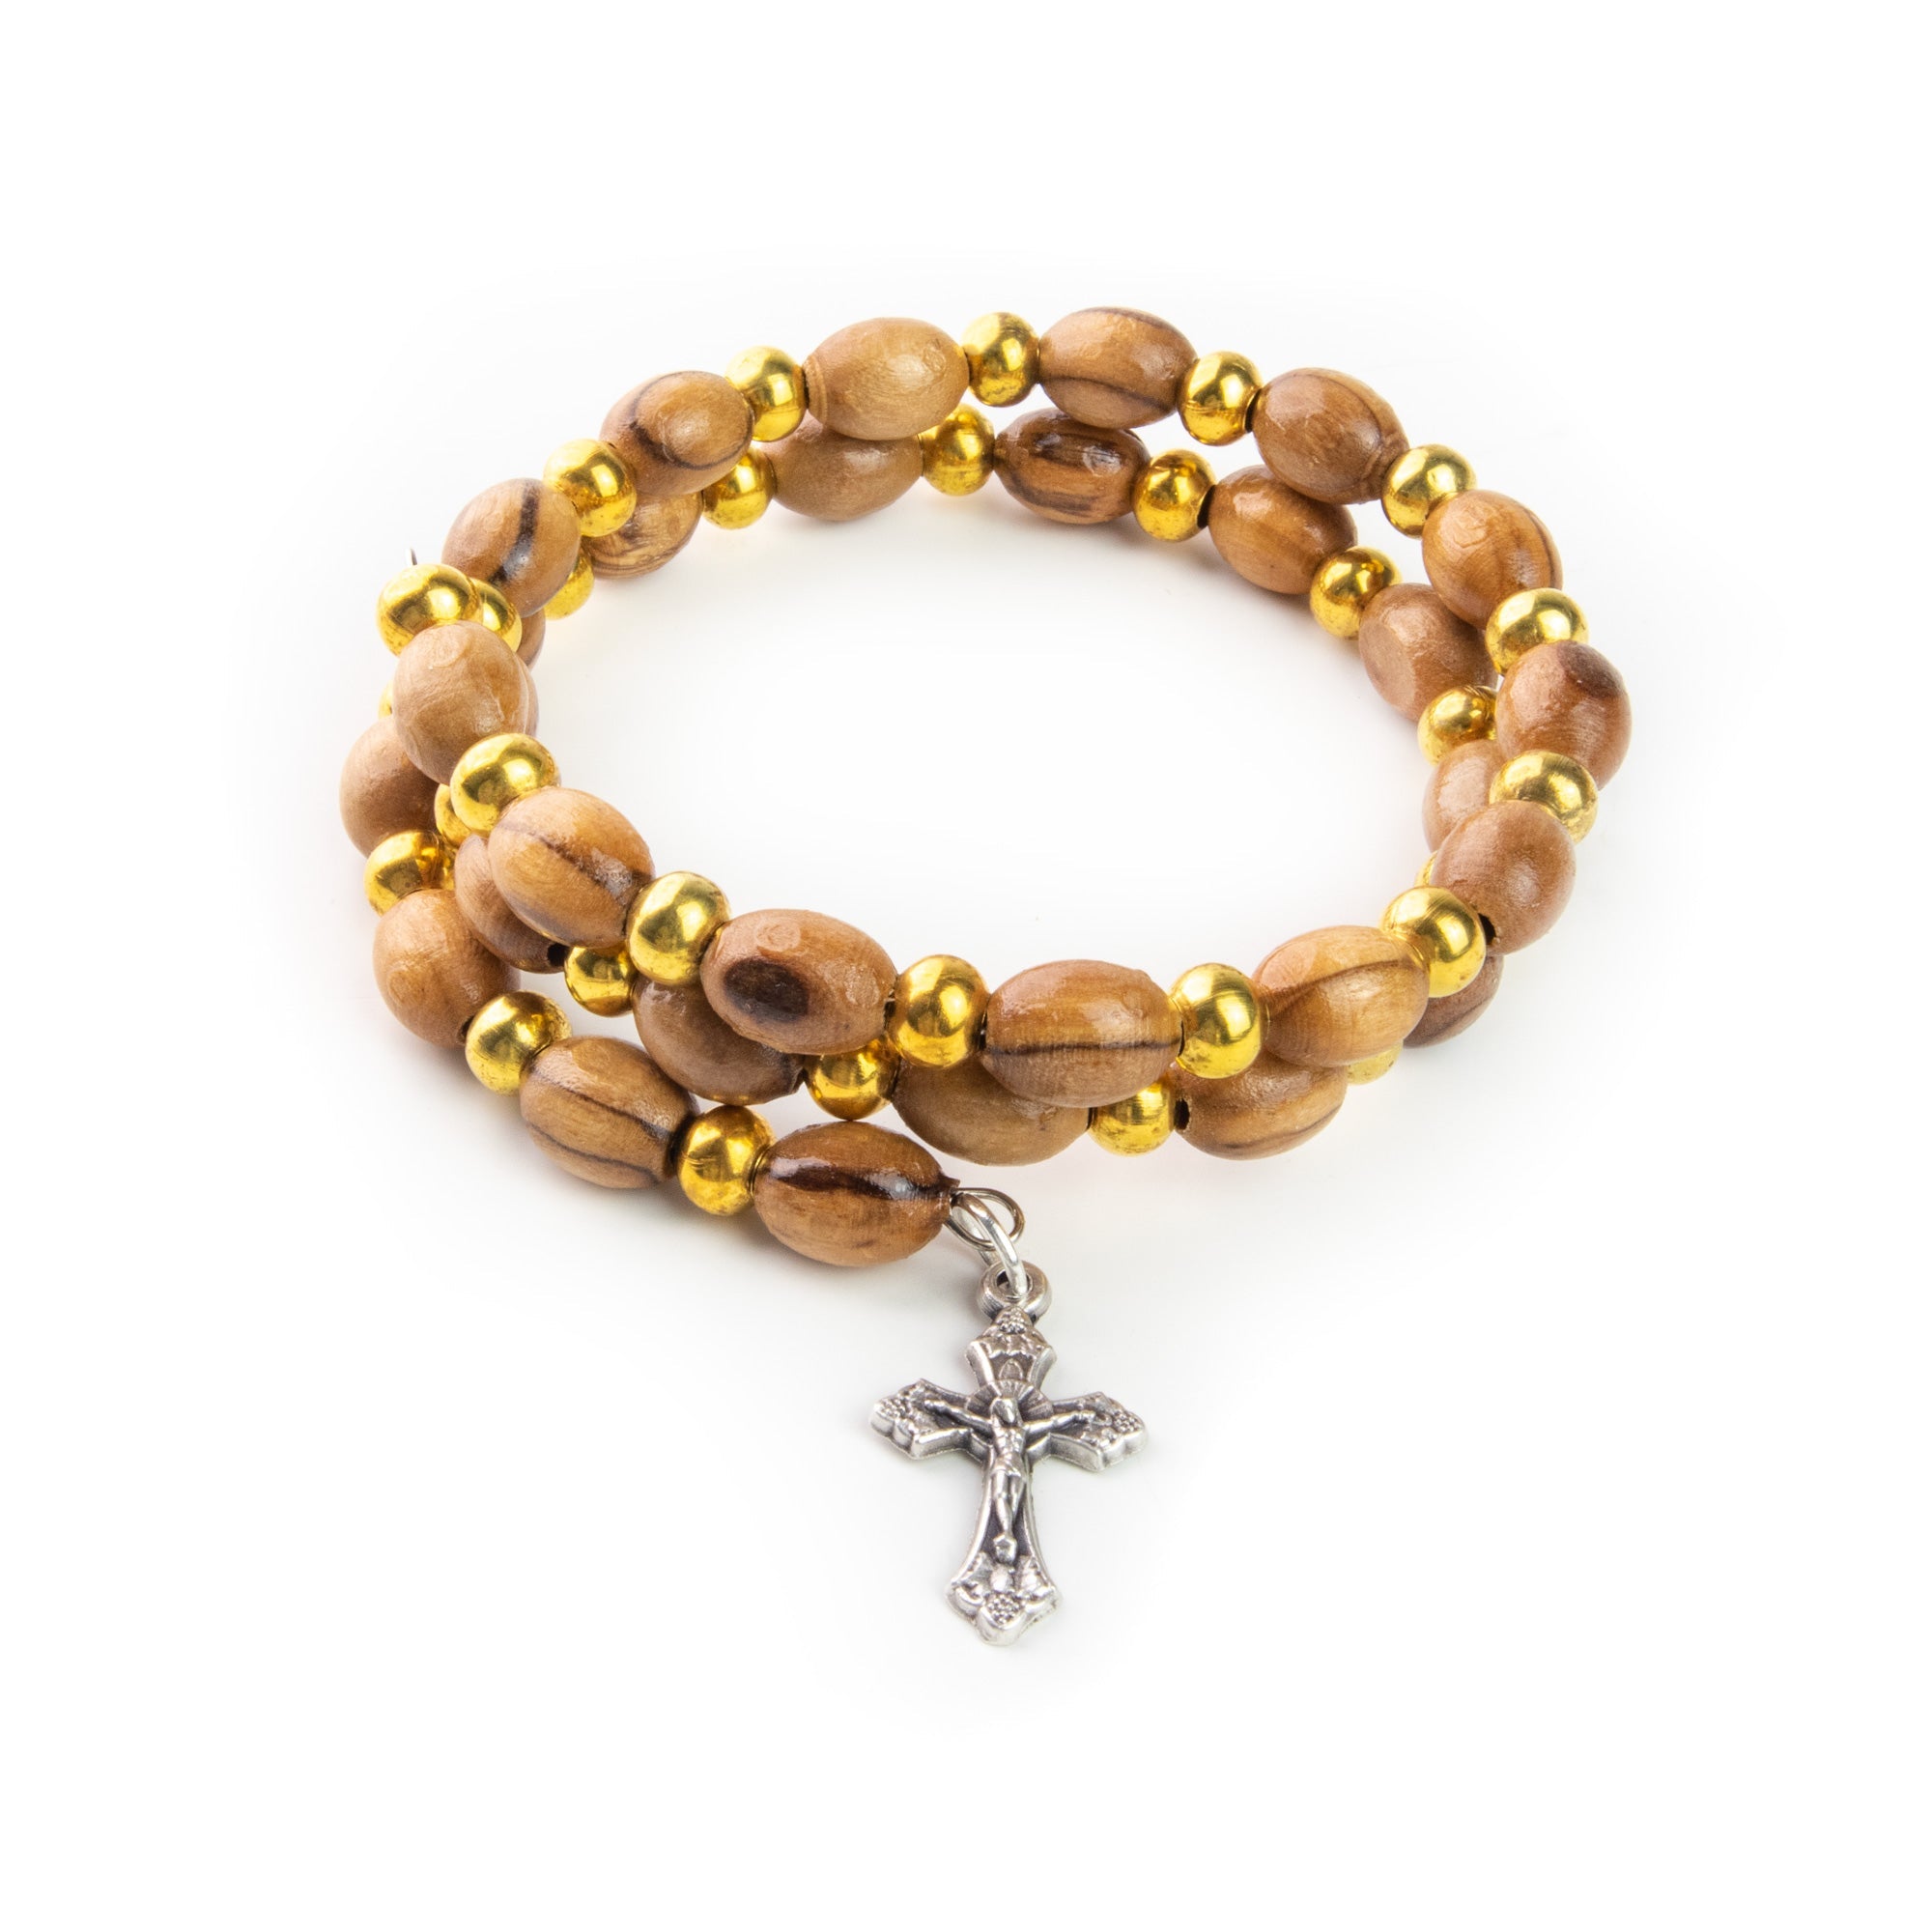 Helix Stretch Wrap Bracelet with Alternating Olive Wood and Gold Beads and Crucifix Dangle in Velvet Box